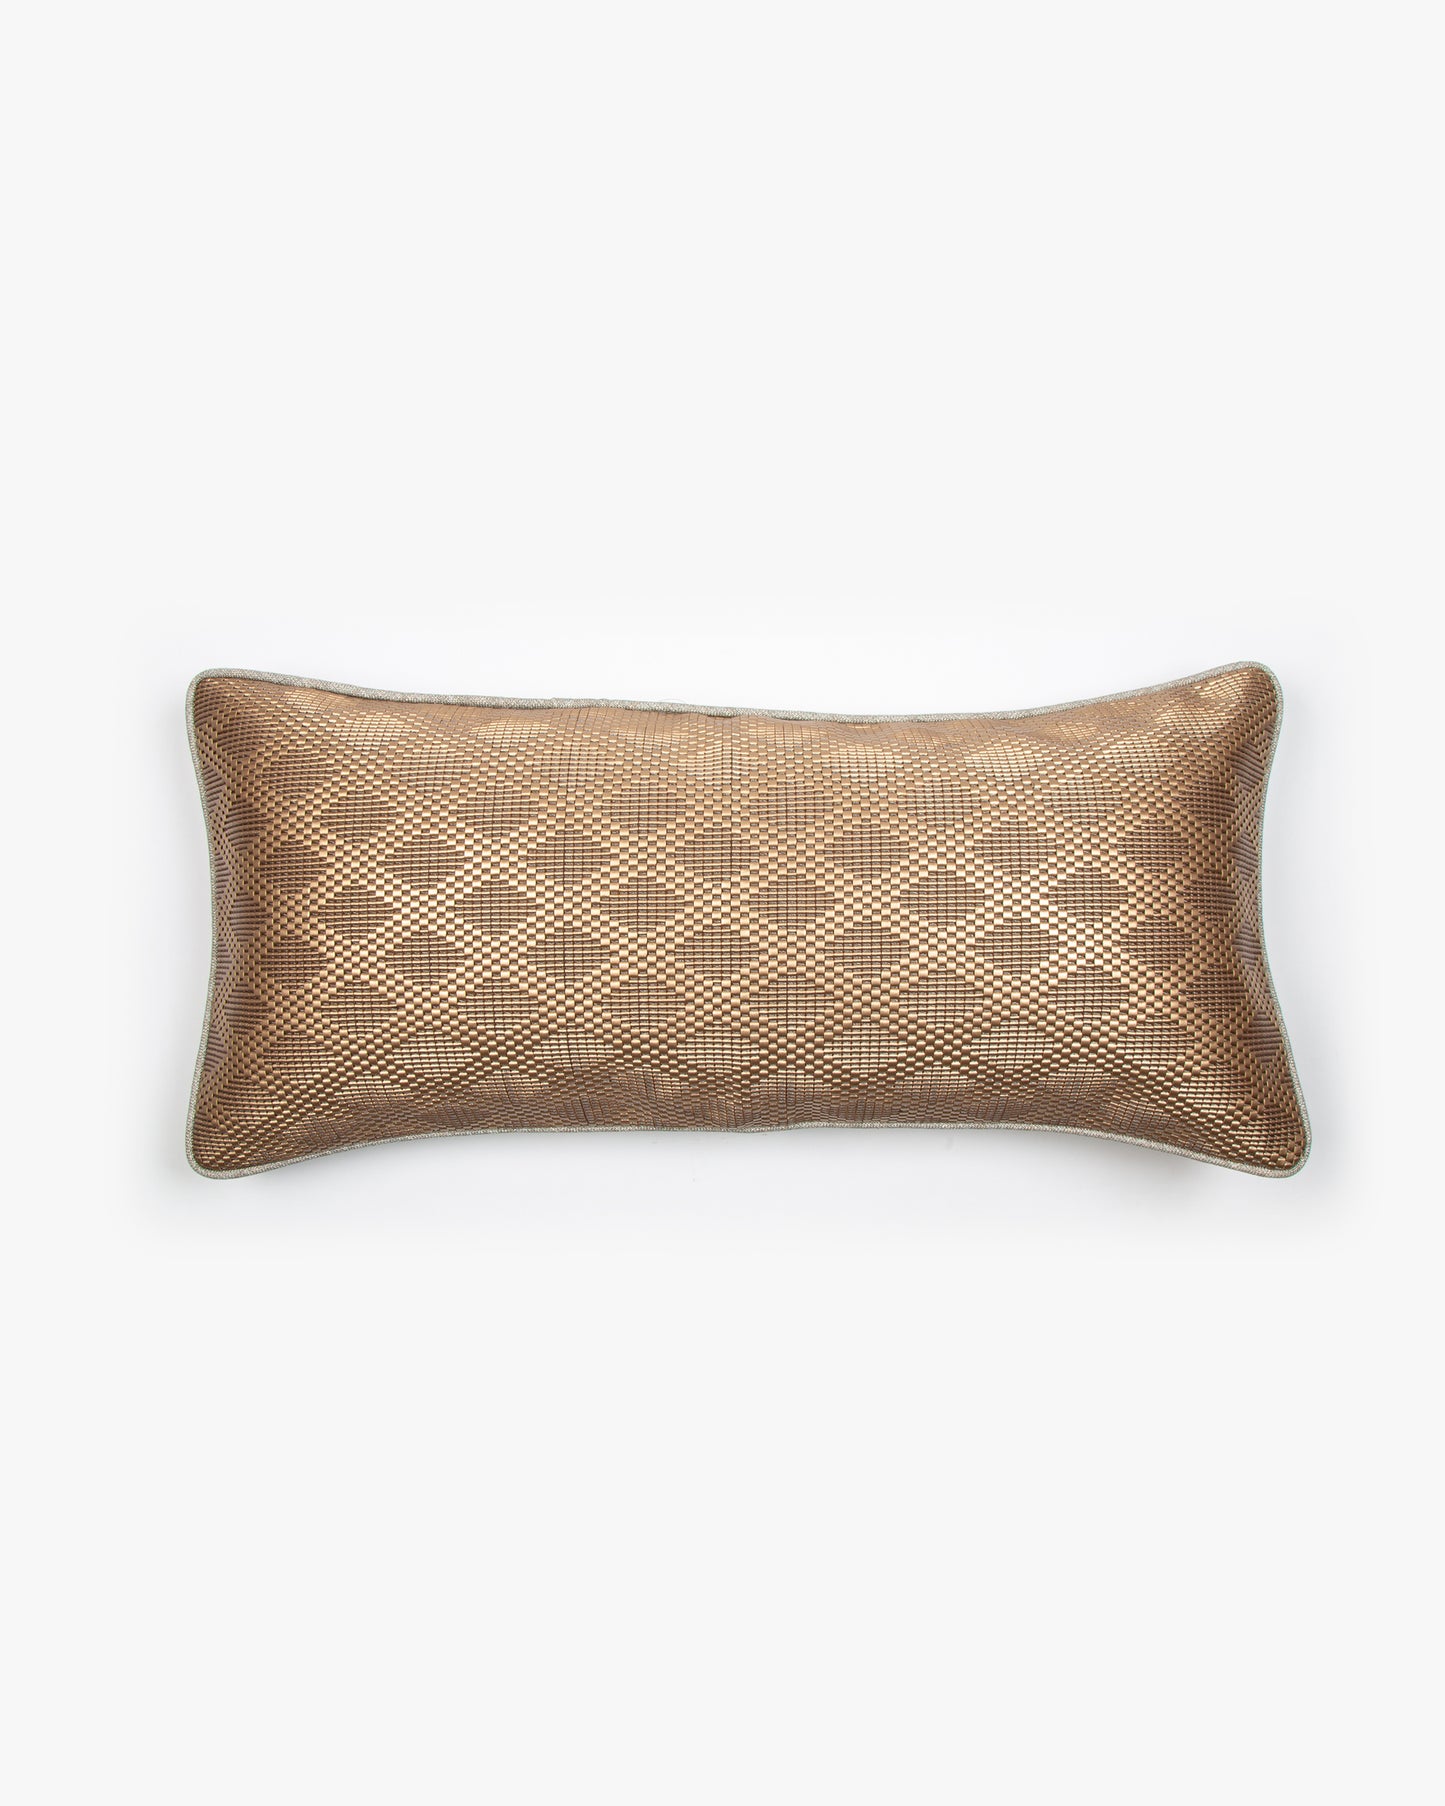 Woven Faux Leather Cushion Cover